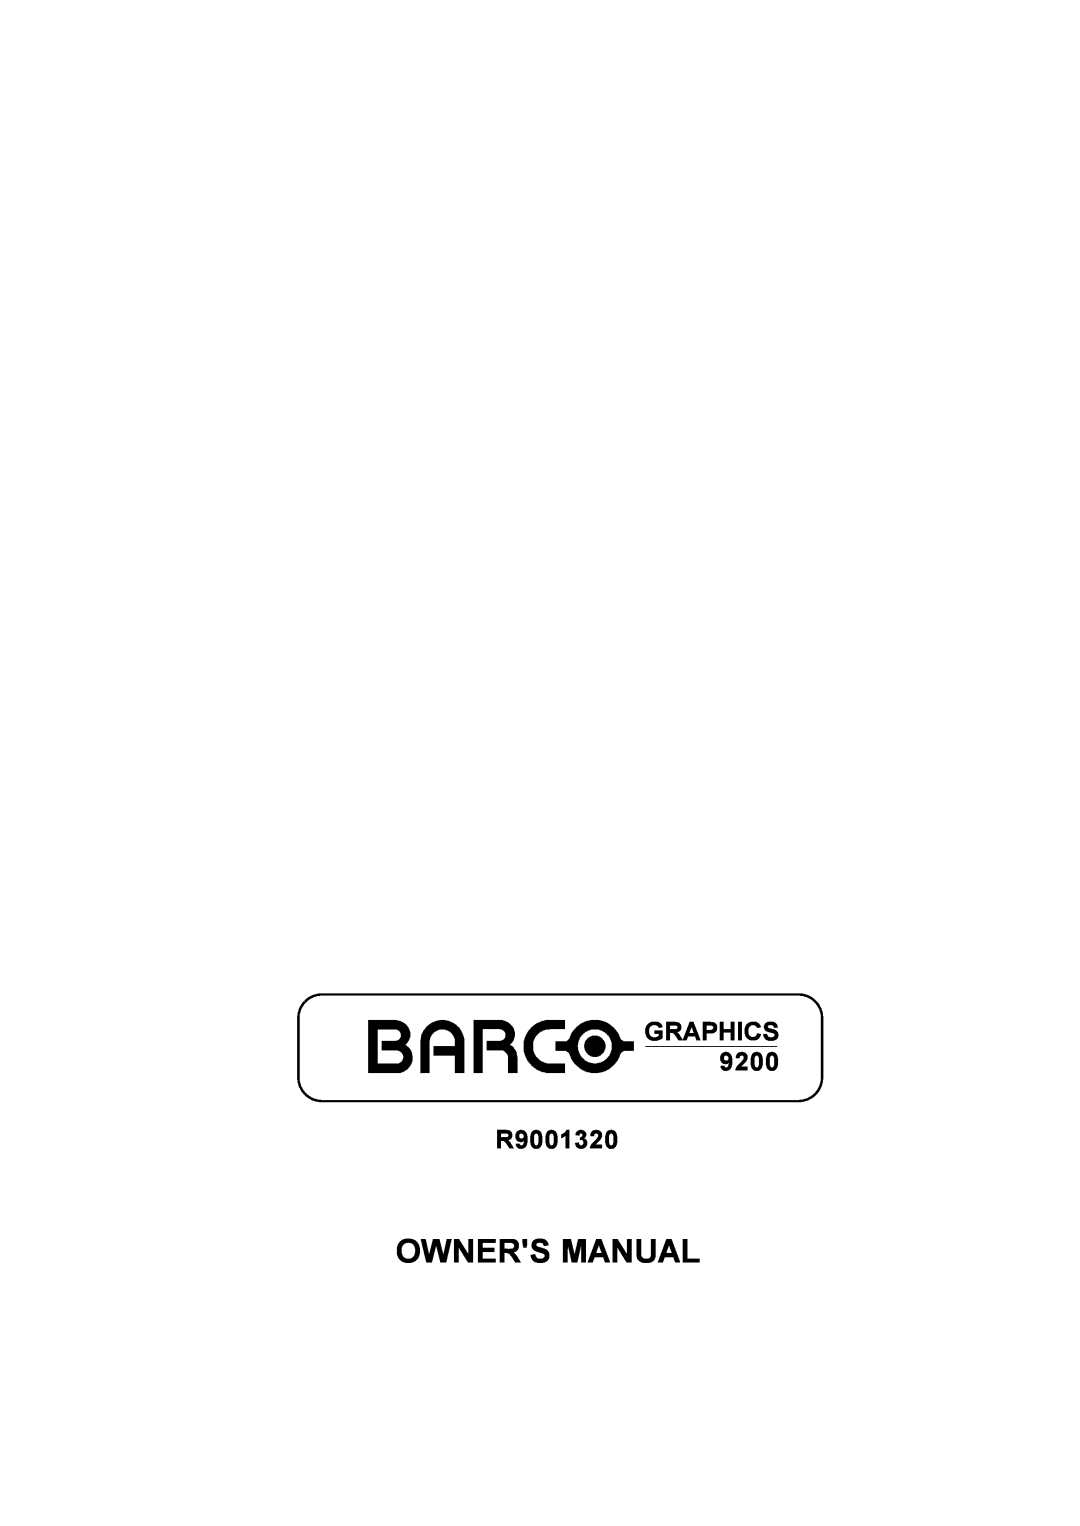 Barco 9200 owner manual Owners Manual, GRAPHICS R9001320 